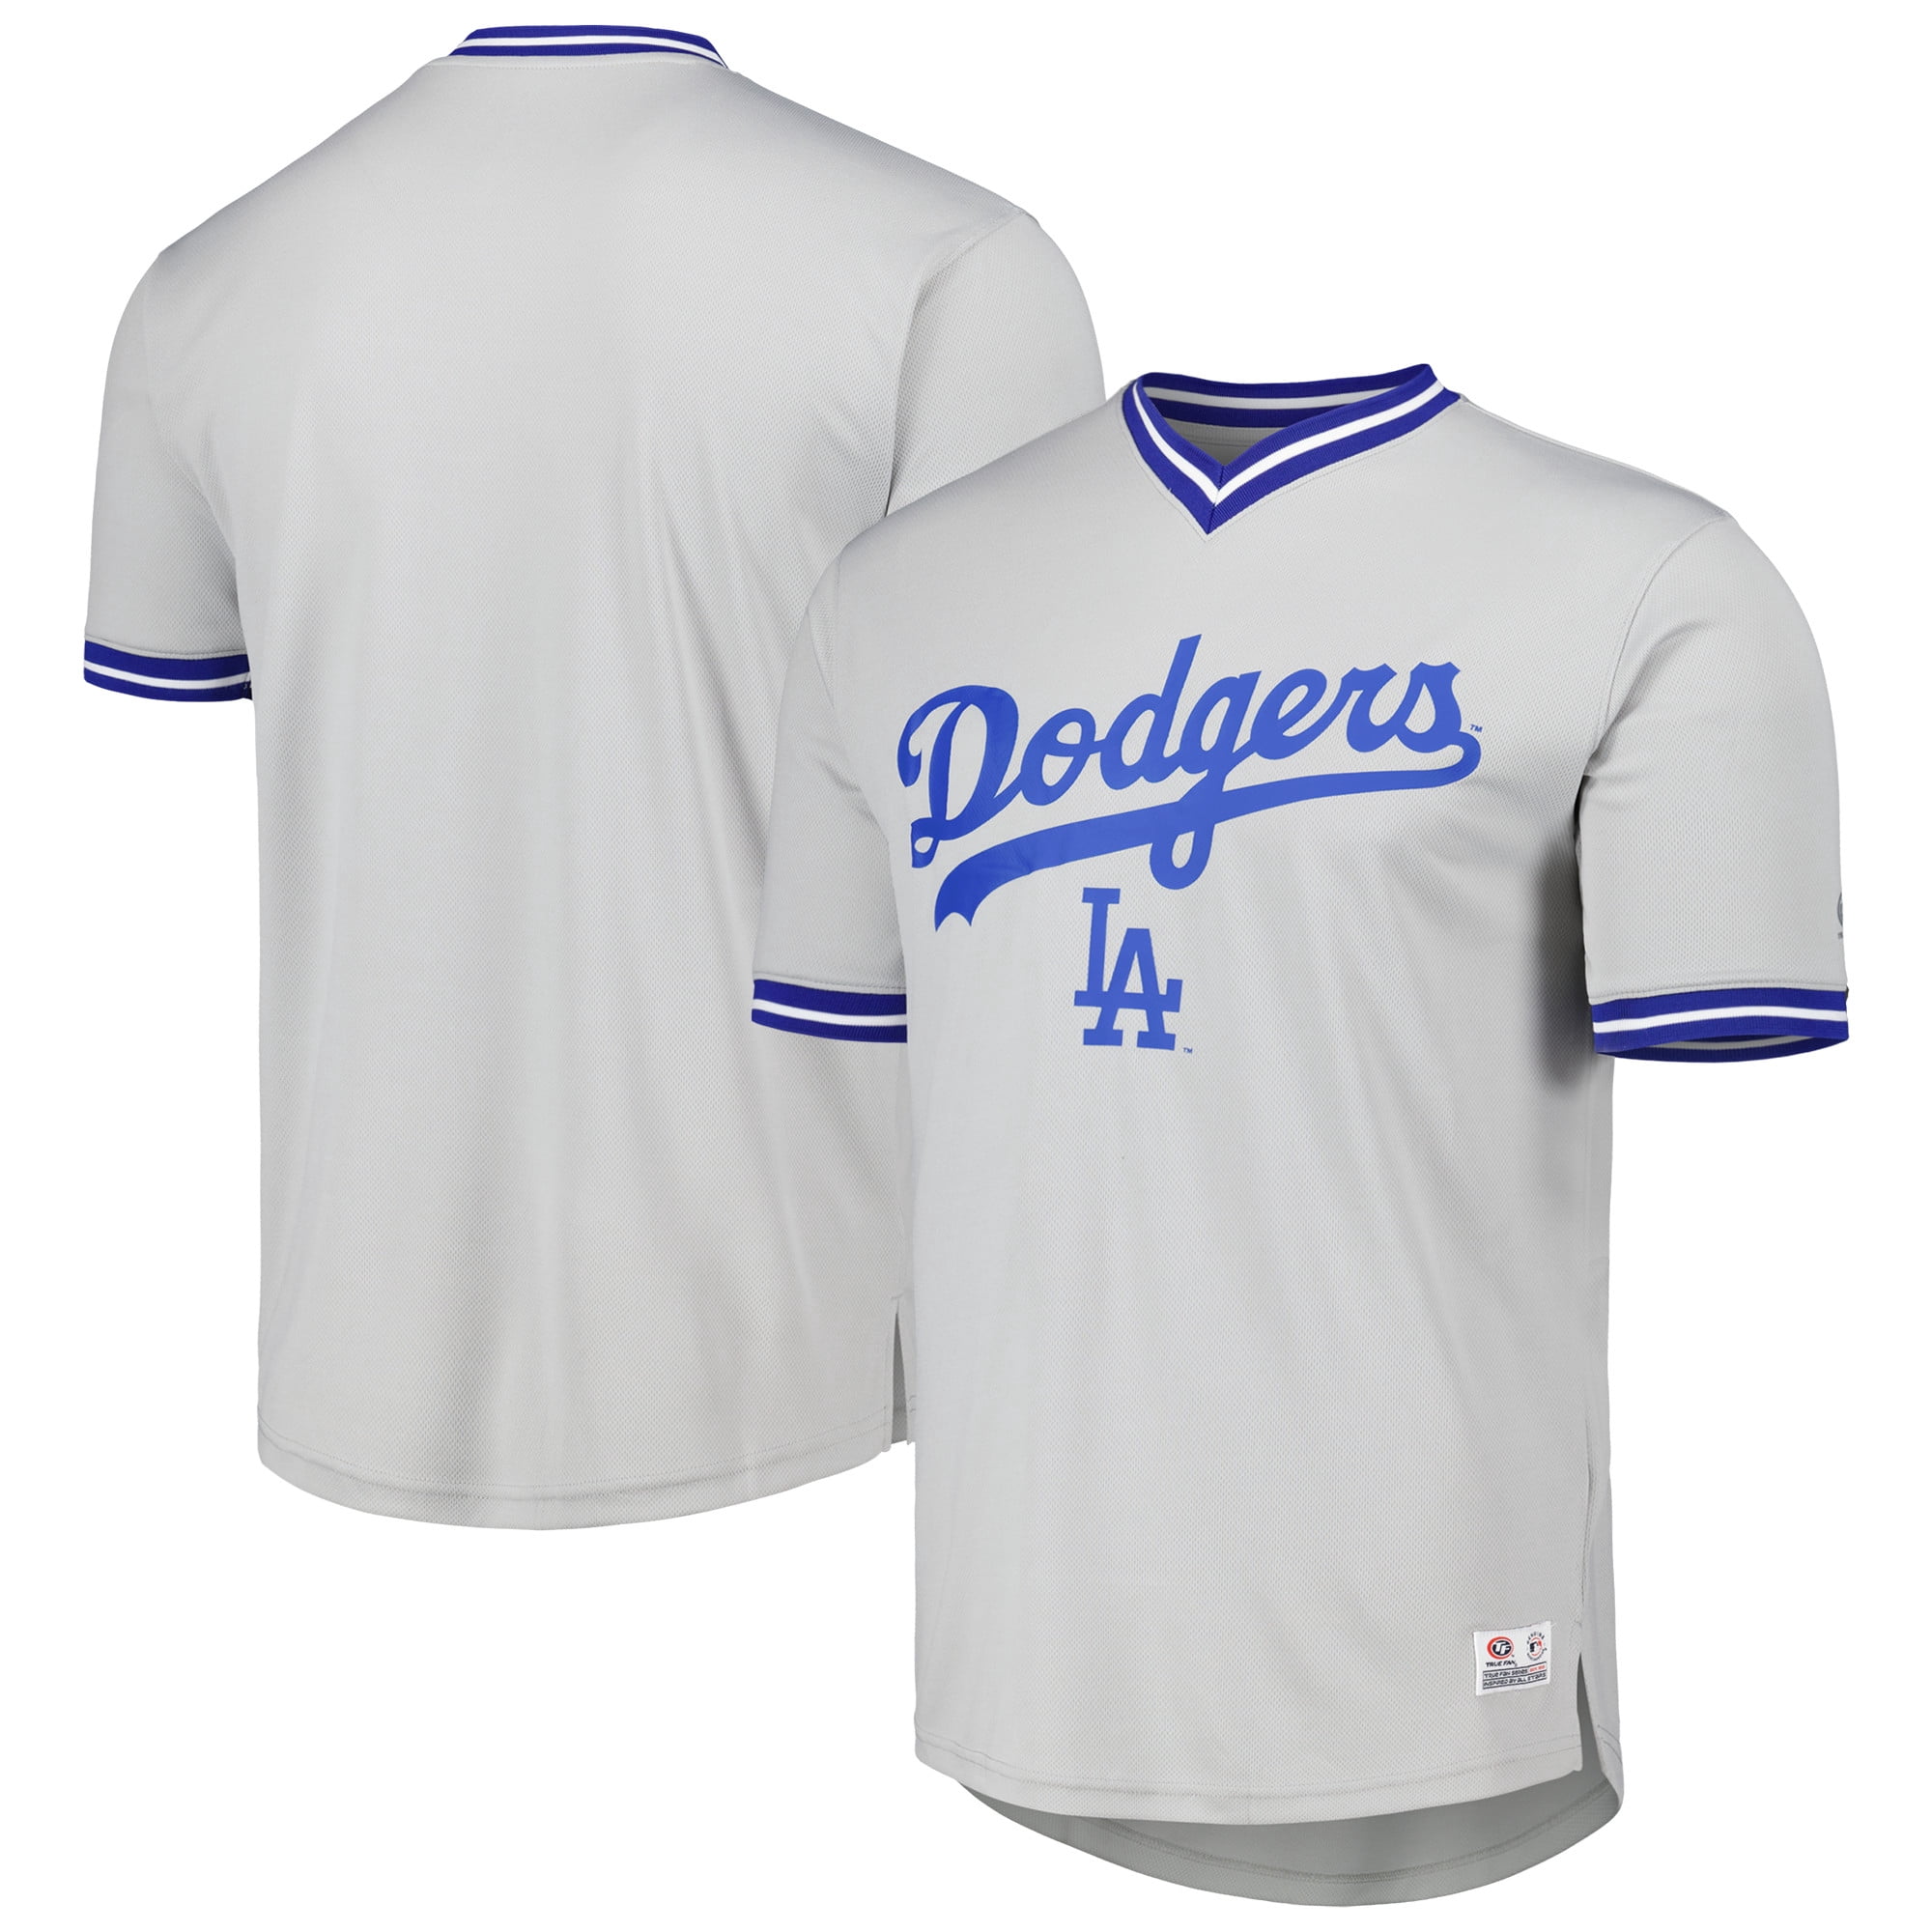 classic dodger jersey